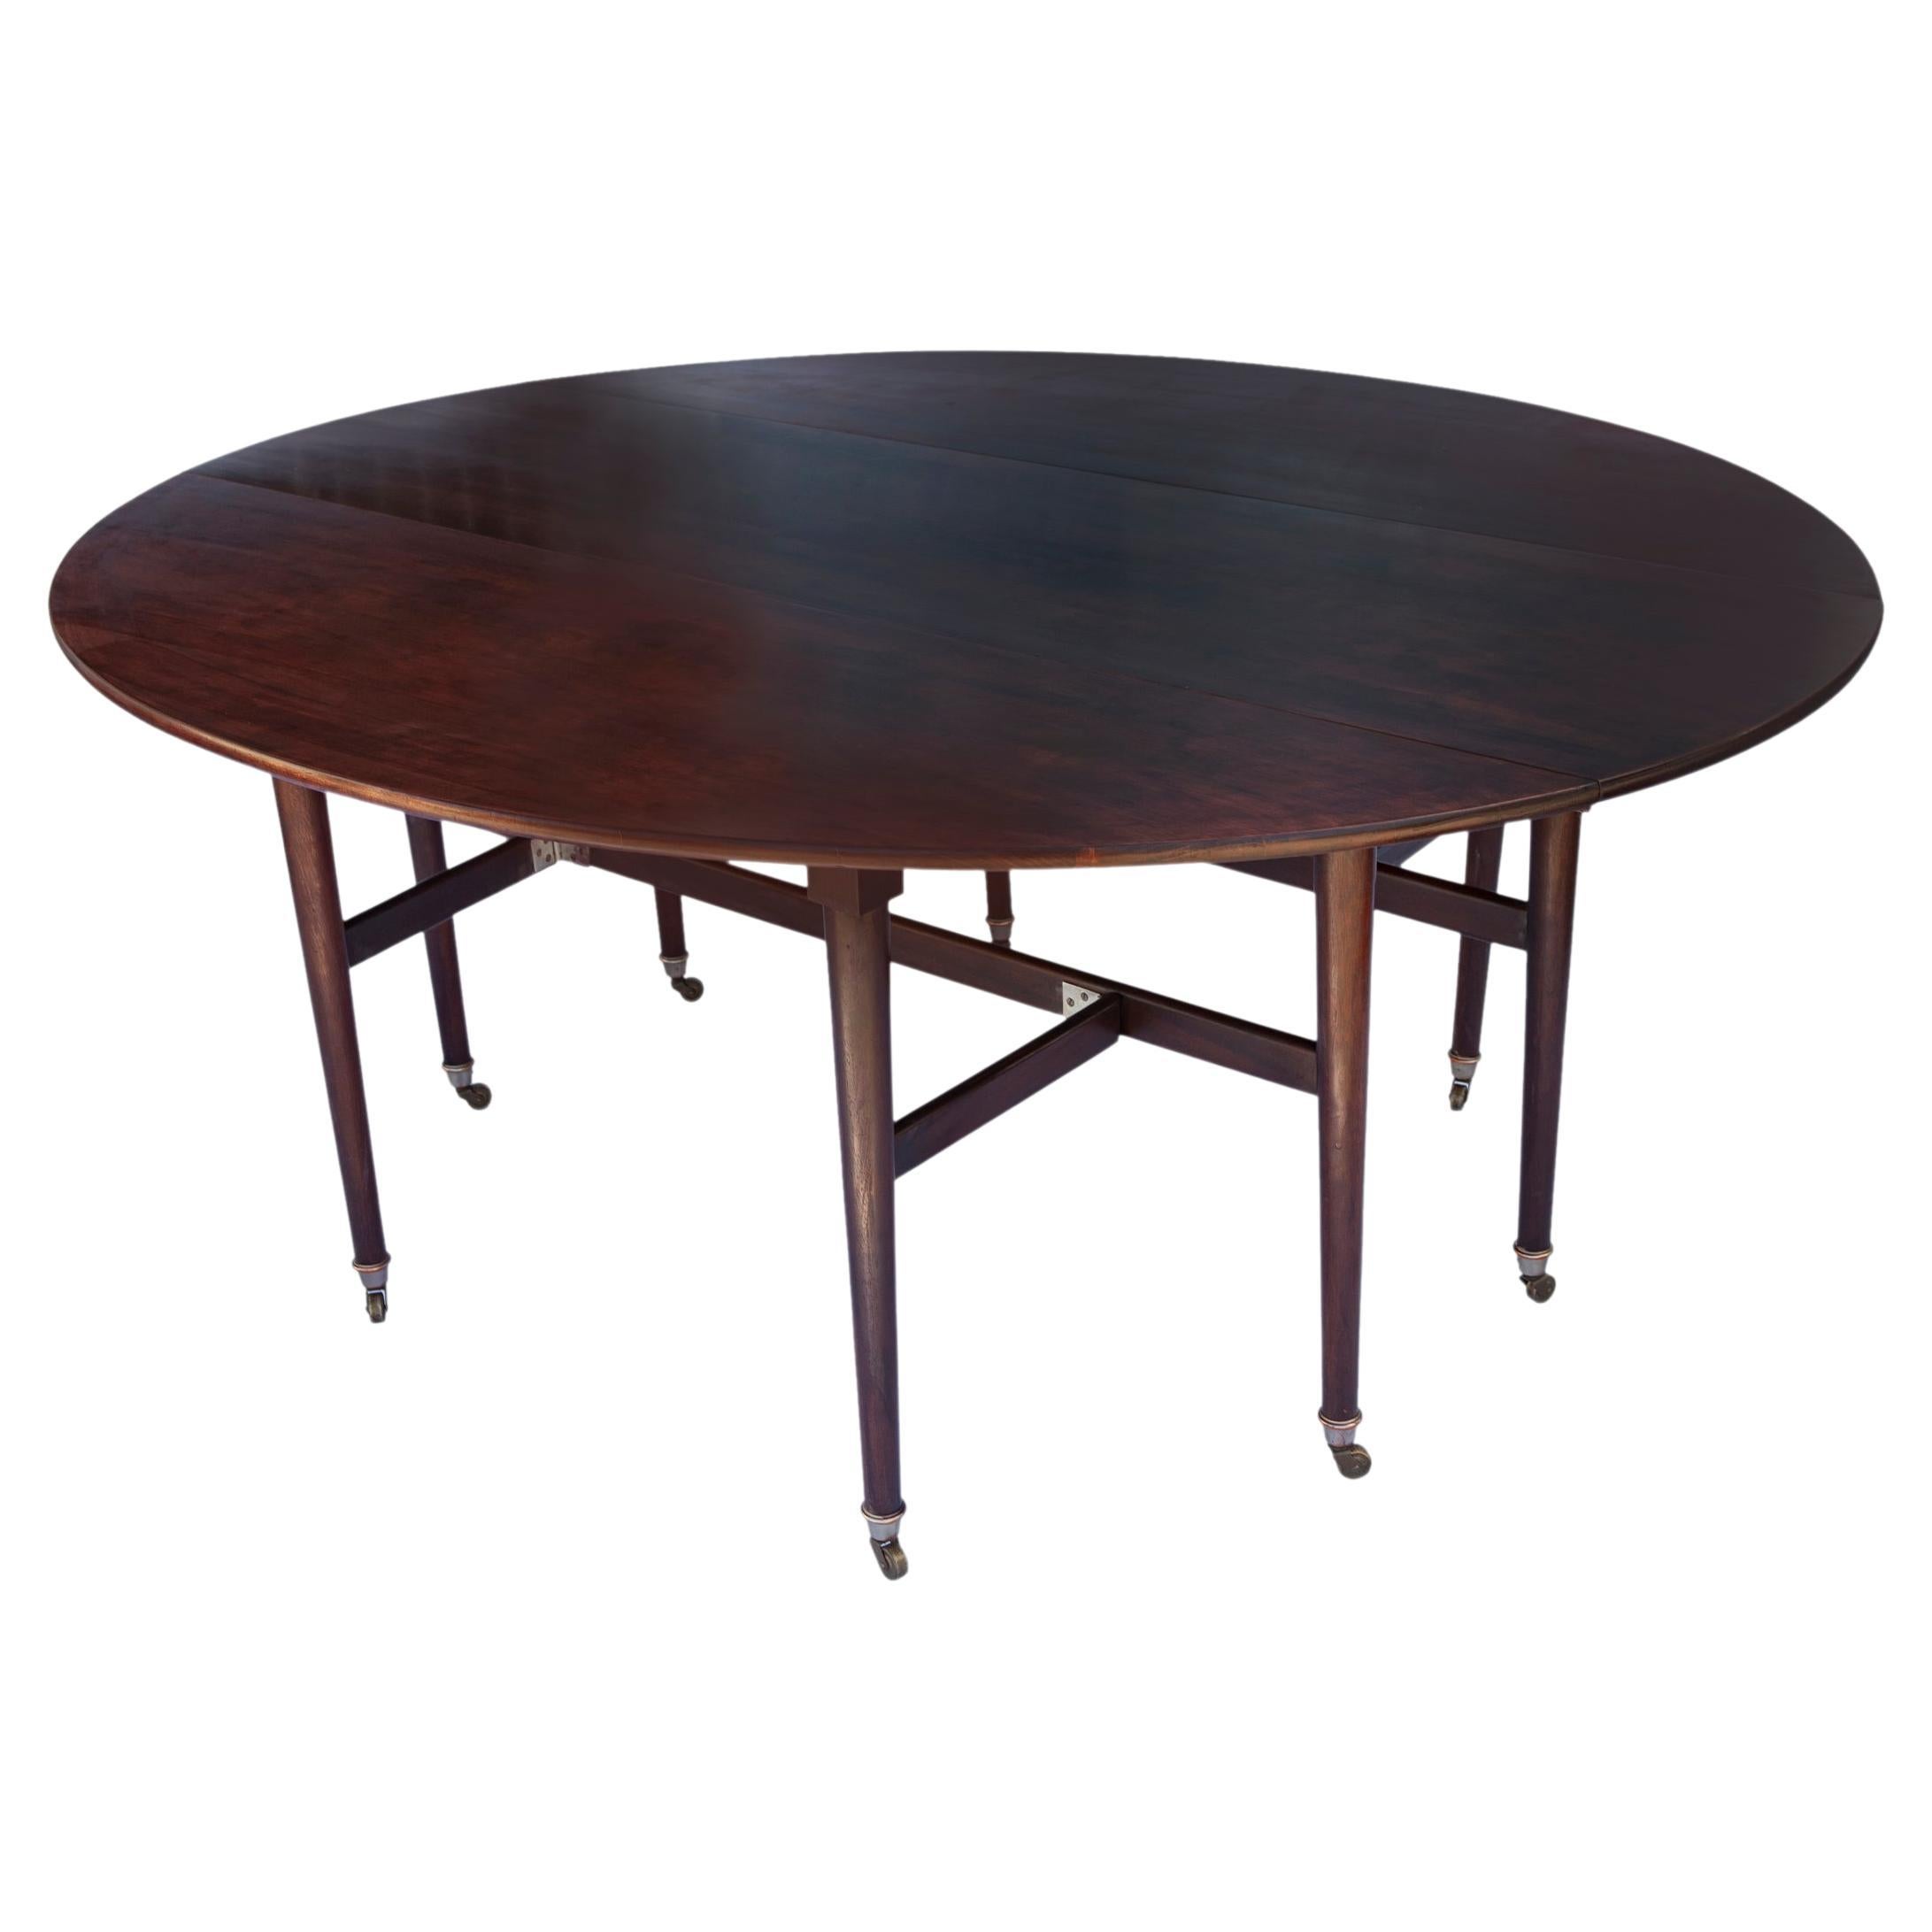 Large Drop Leaf Cherry Dining Table For Sale